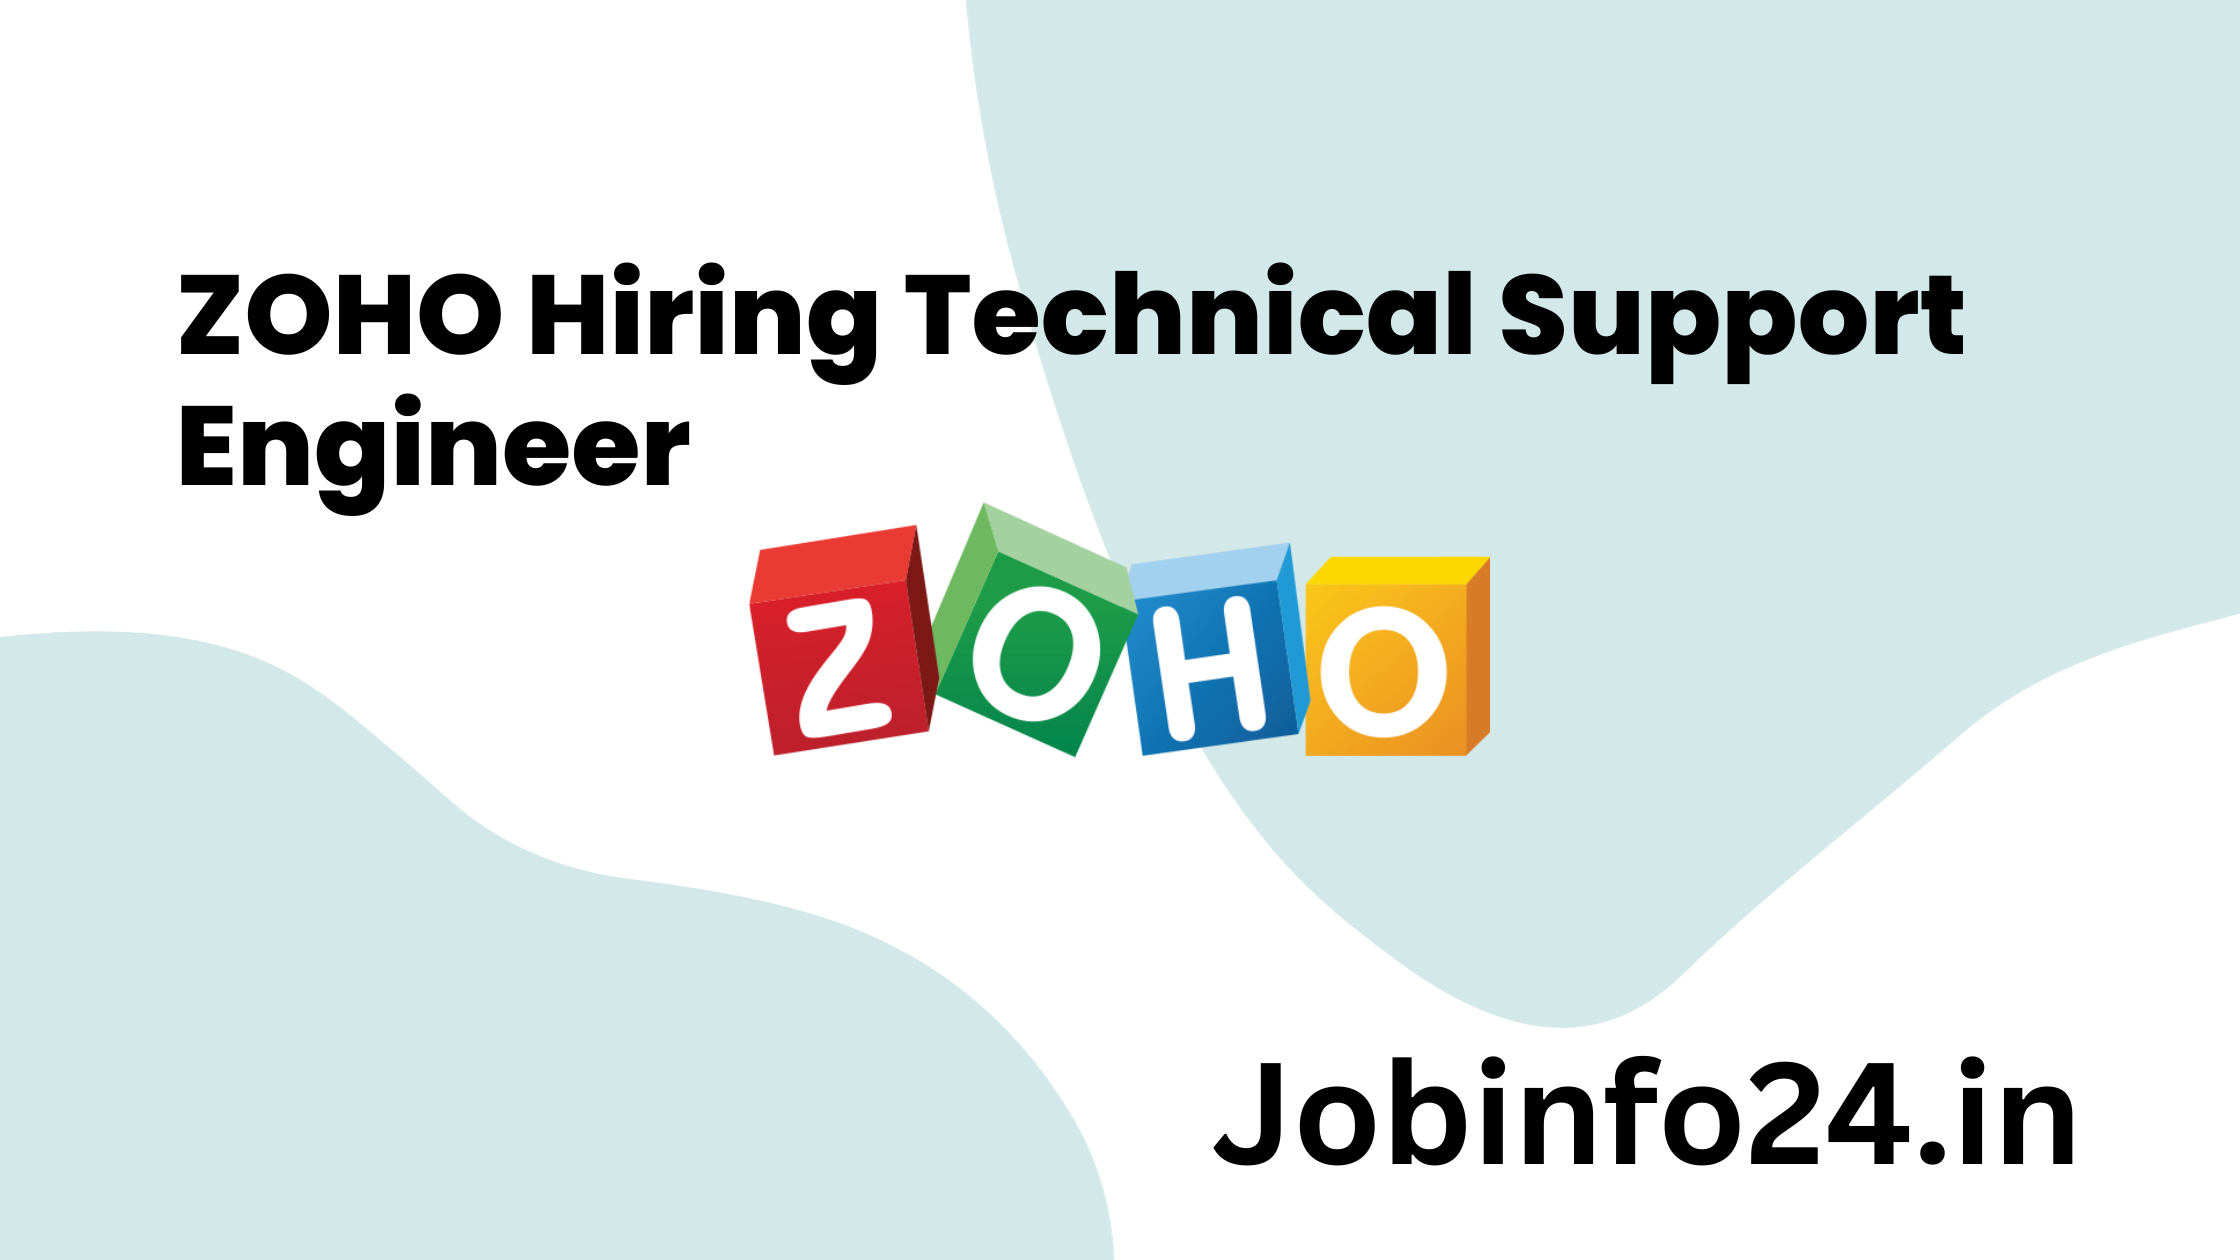 ZOHO Hiring Technical Support Engineer